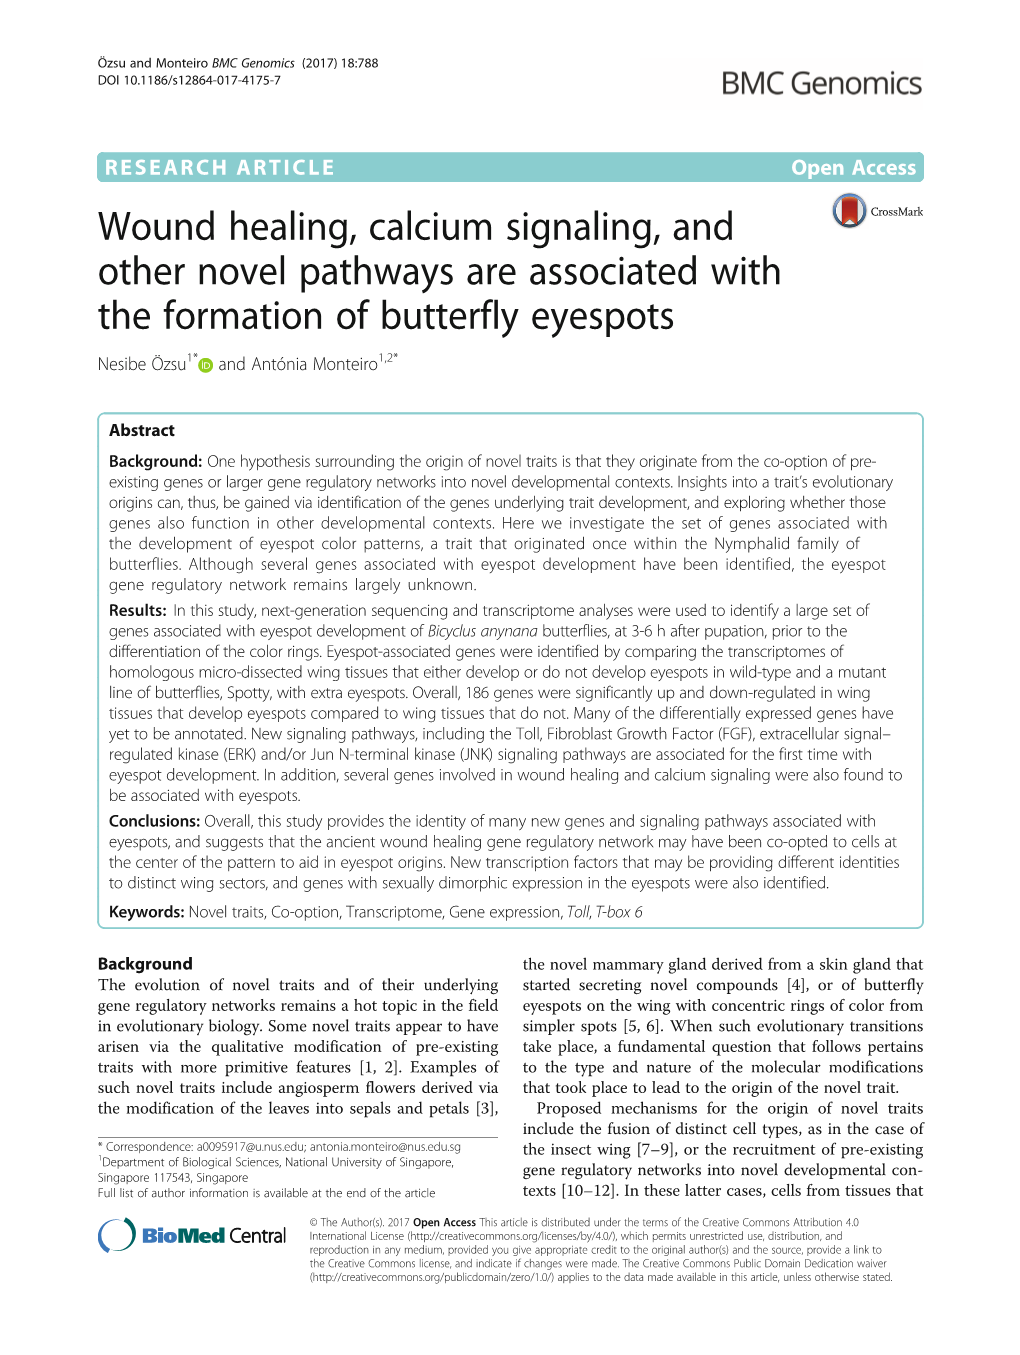 Wound Healing, Calcium Signaling, and Other Novel Pathways Are Associated with the Formation of Butterfly Eyespots Nesibe Özsu1* and Antónia Monteiro1,2*